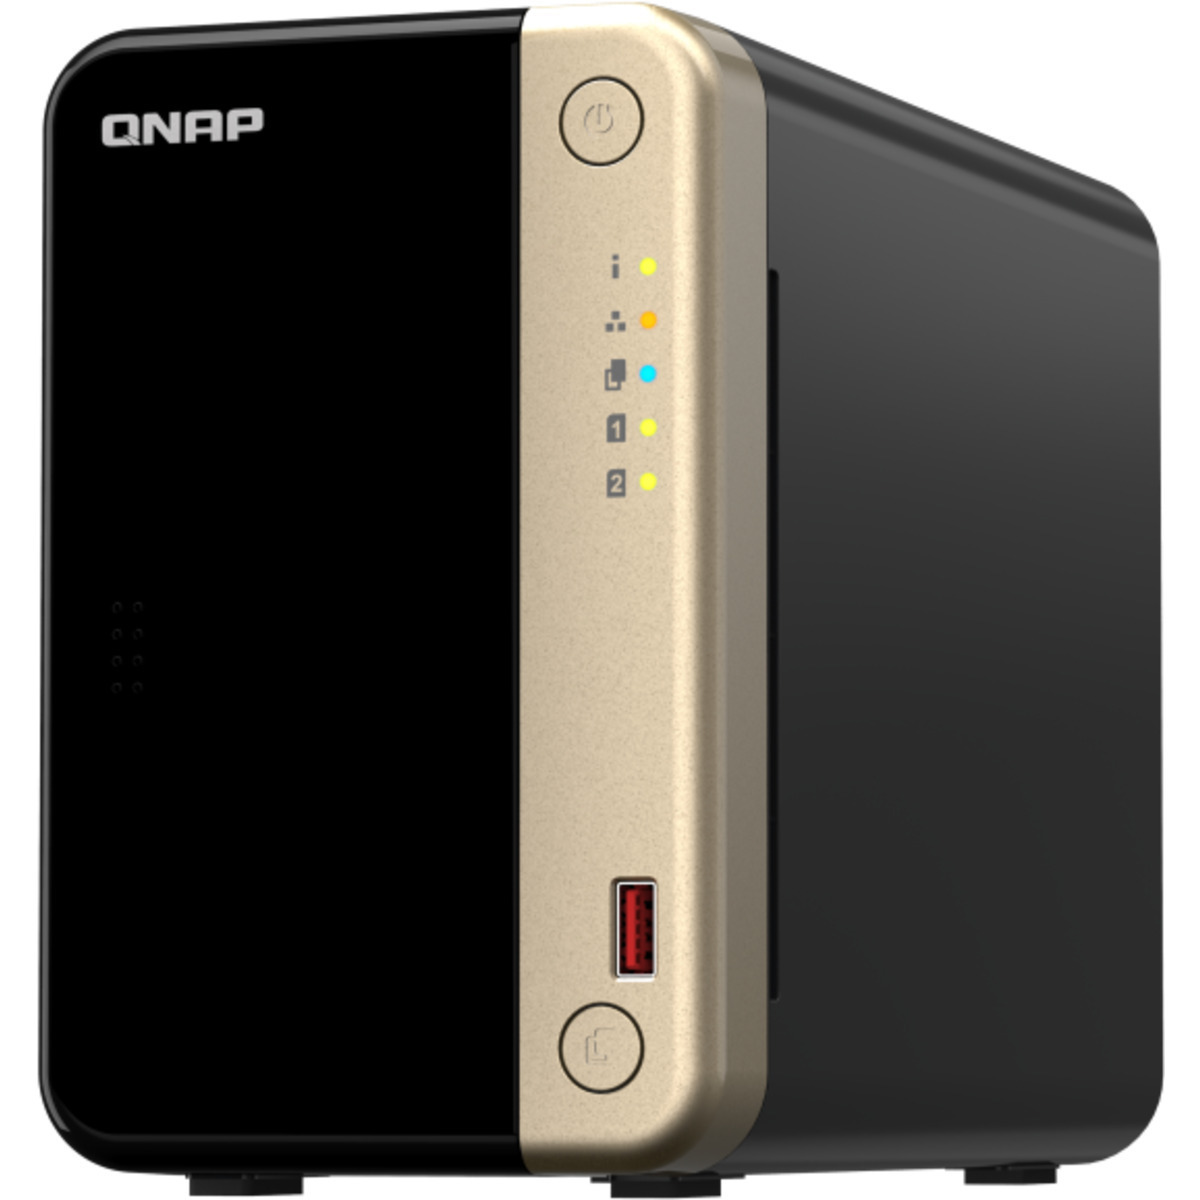 QNAP TS-264 16tb 2-Bay Desktop Multimedia / Power User / Business NAS - Network Attached Storage Device 2x8tb Seagate IronWolf Pro ST8000NT001 3.5 7200rpm SATA 6Gb/s HDD NAS Class Drives Installed - Burn-In Tested - ON SALE TS-264